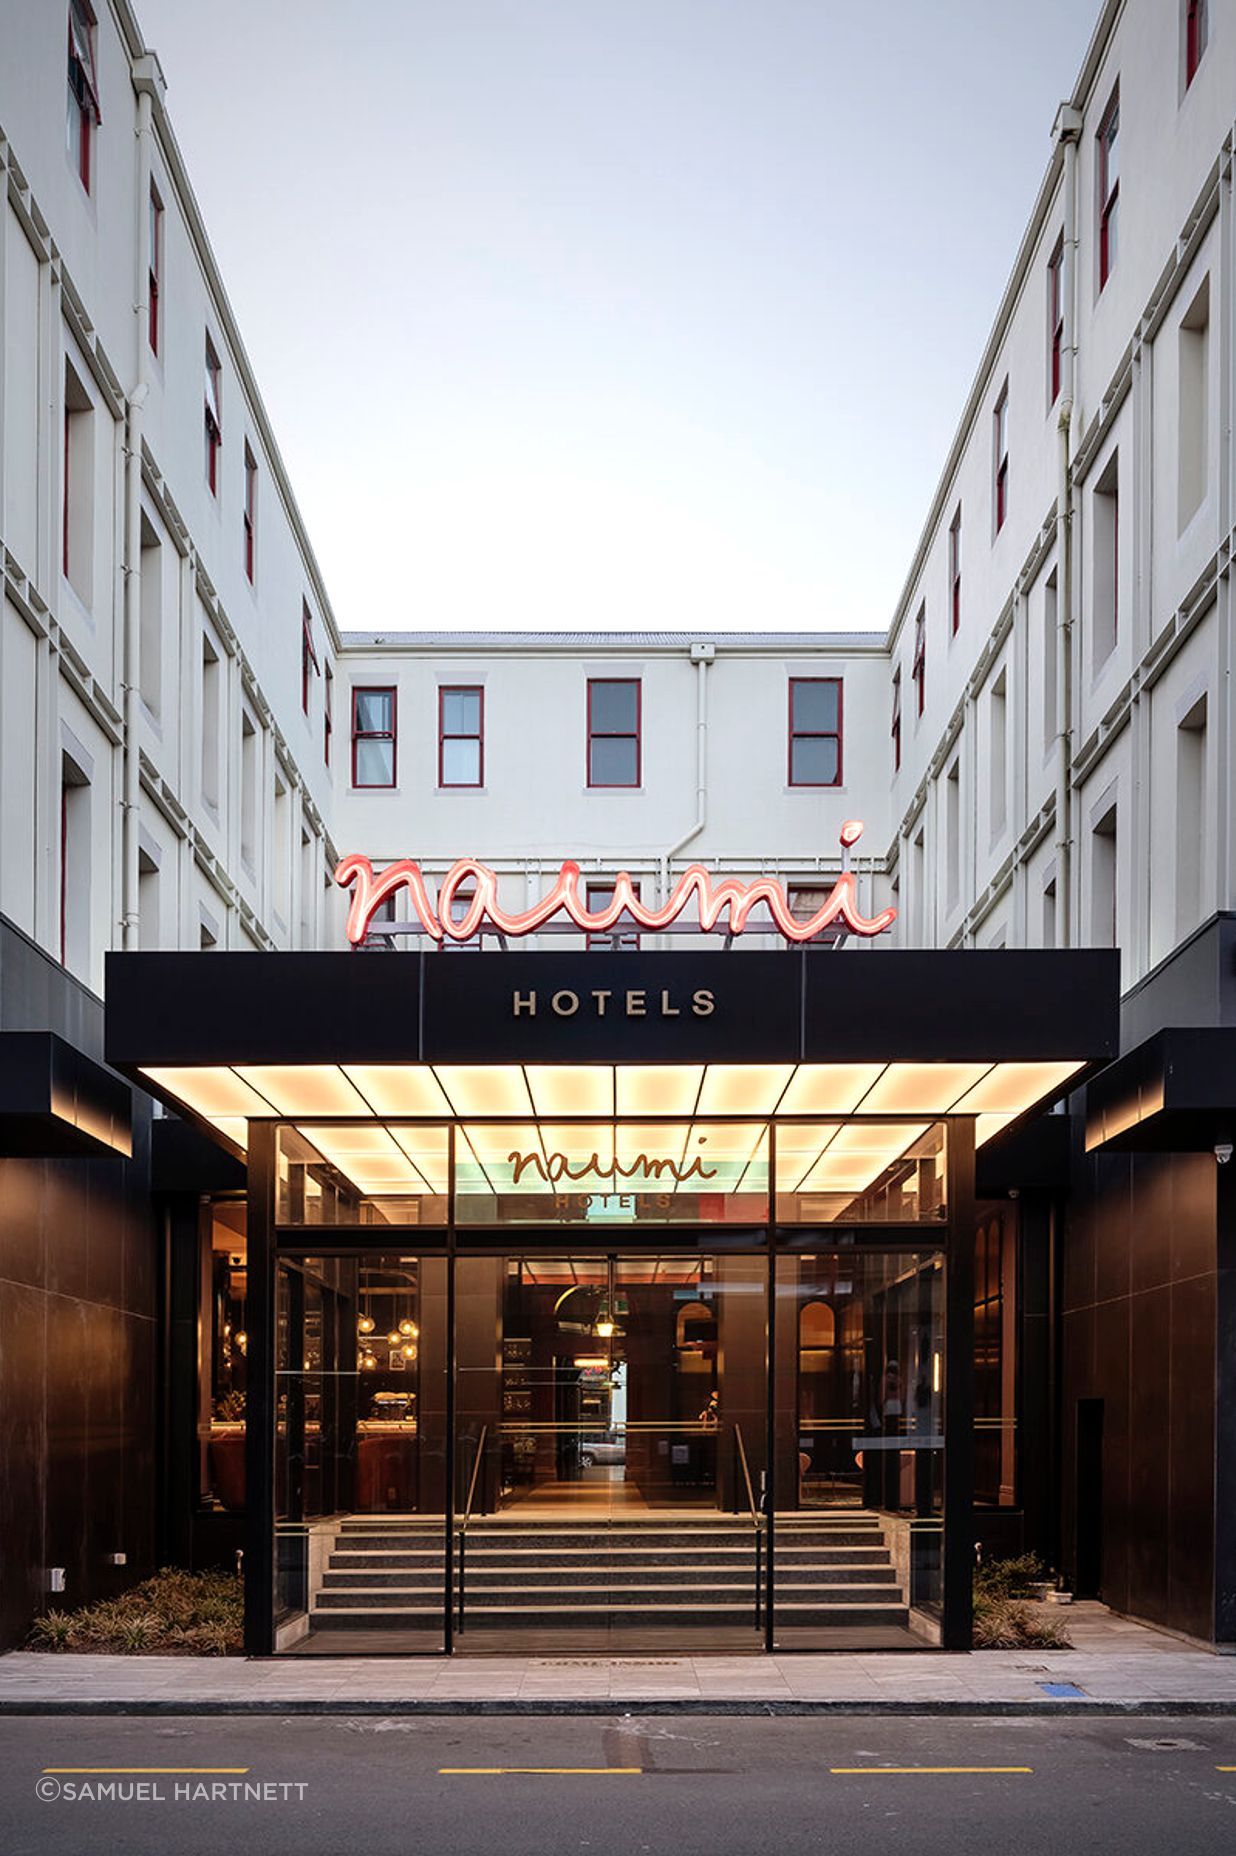 The Naumi Studio Hotel Wellington on Cuba Street occupies an Edwardian building, an era that was the inspiration for the storybook interiors by Material Creative.